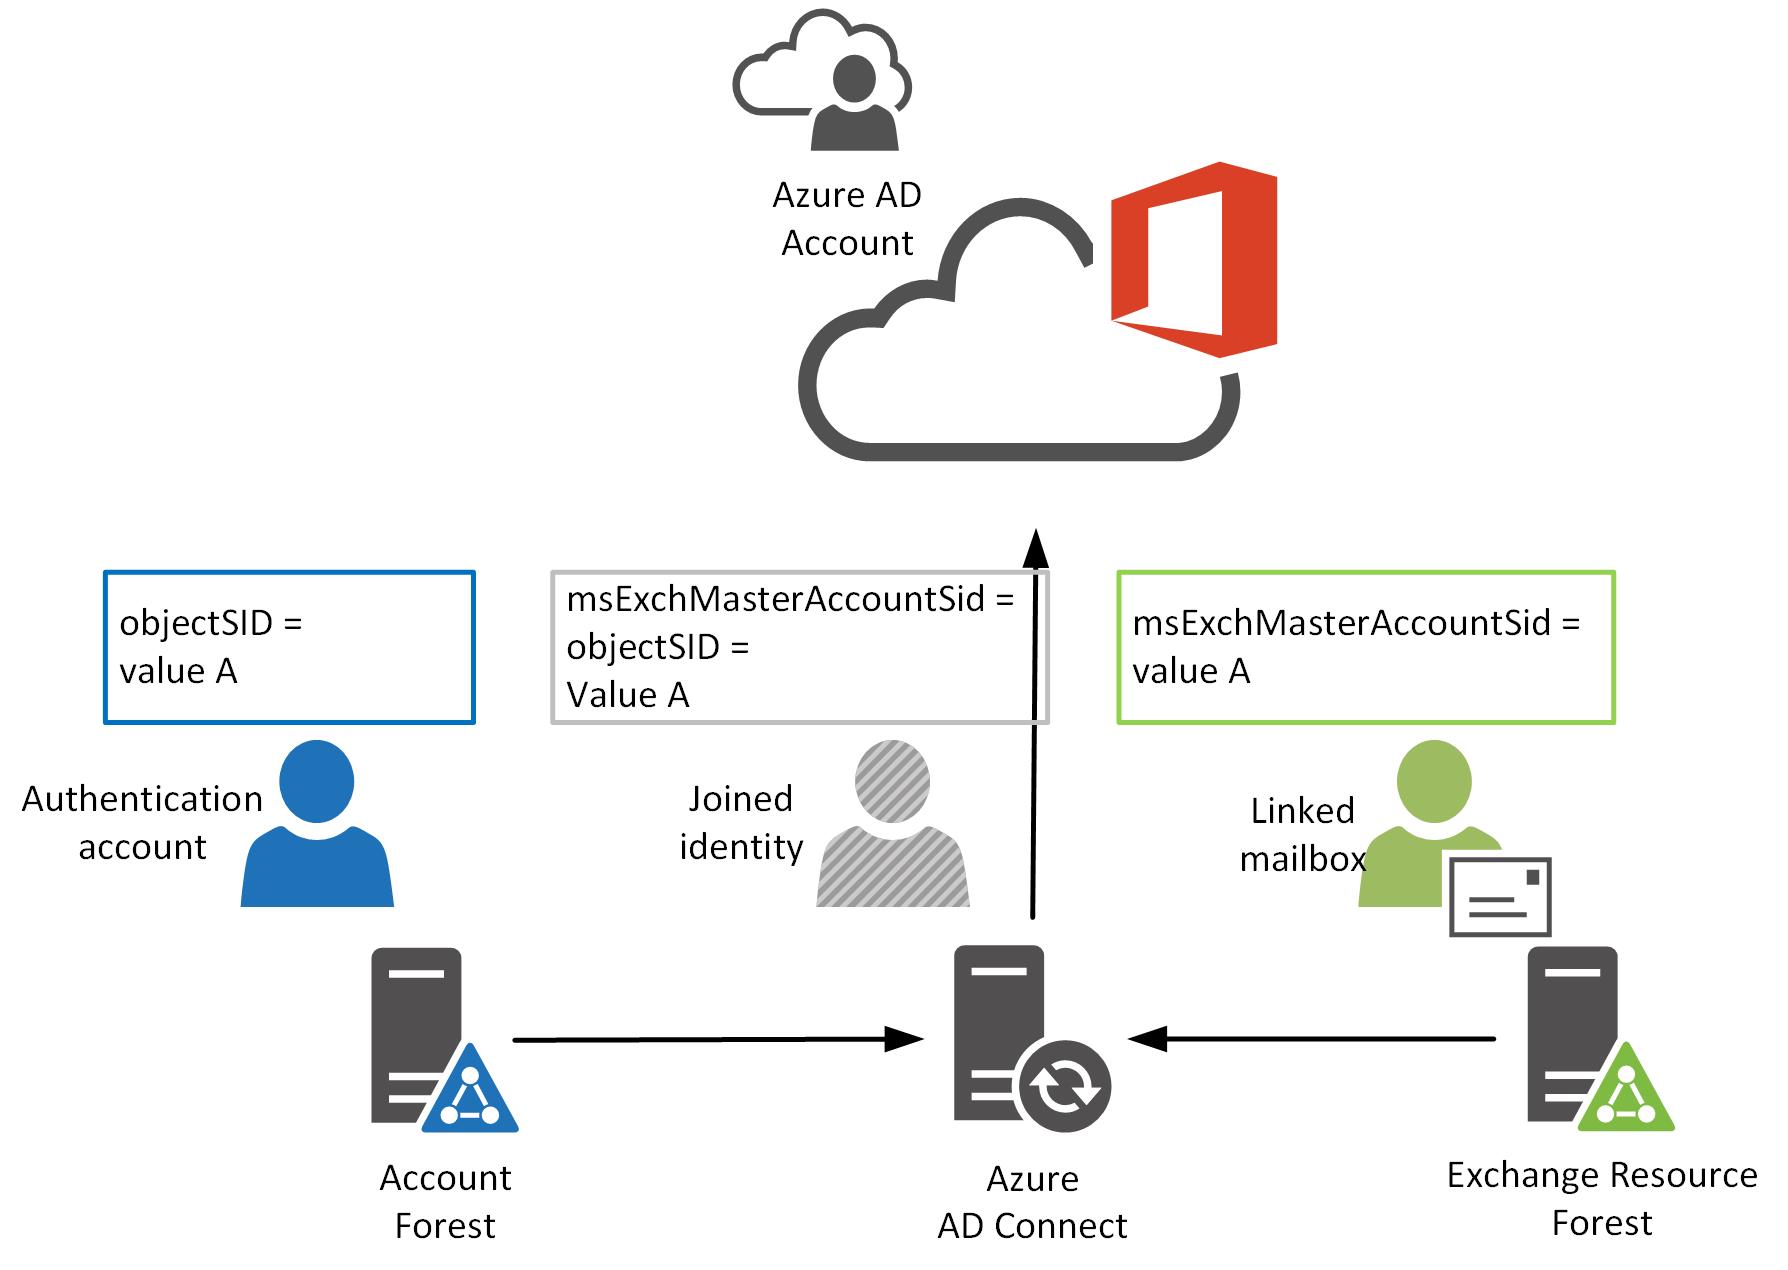 Linked mailbox matched with authentication account